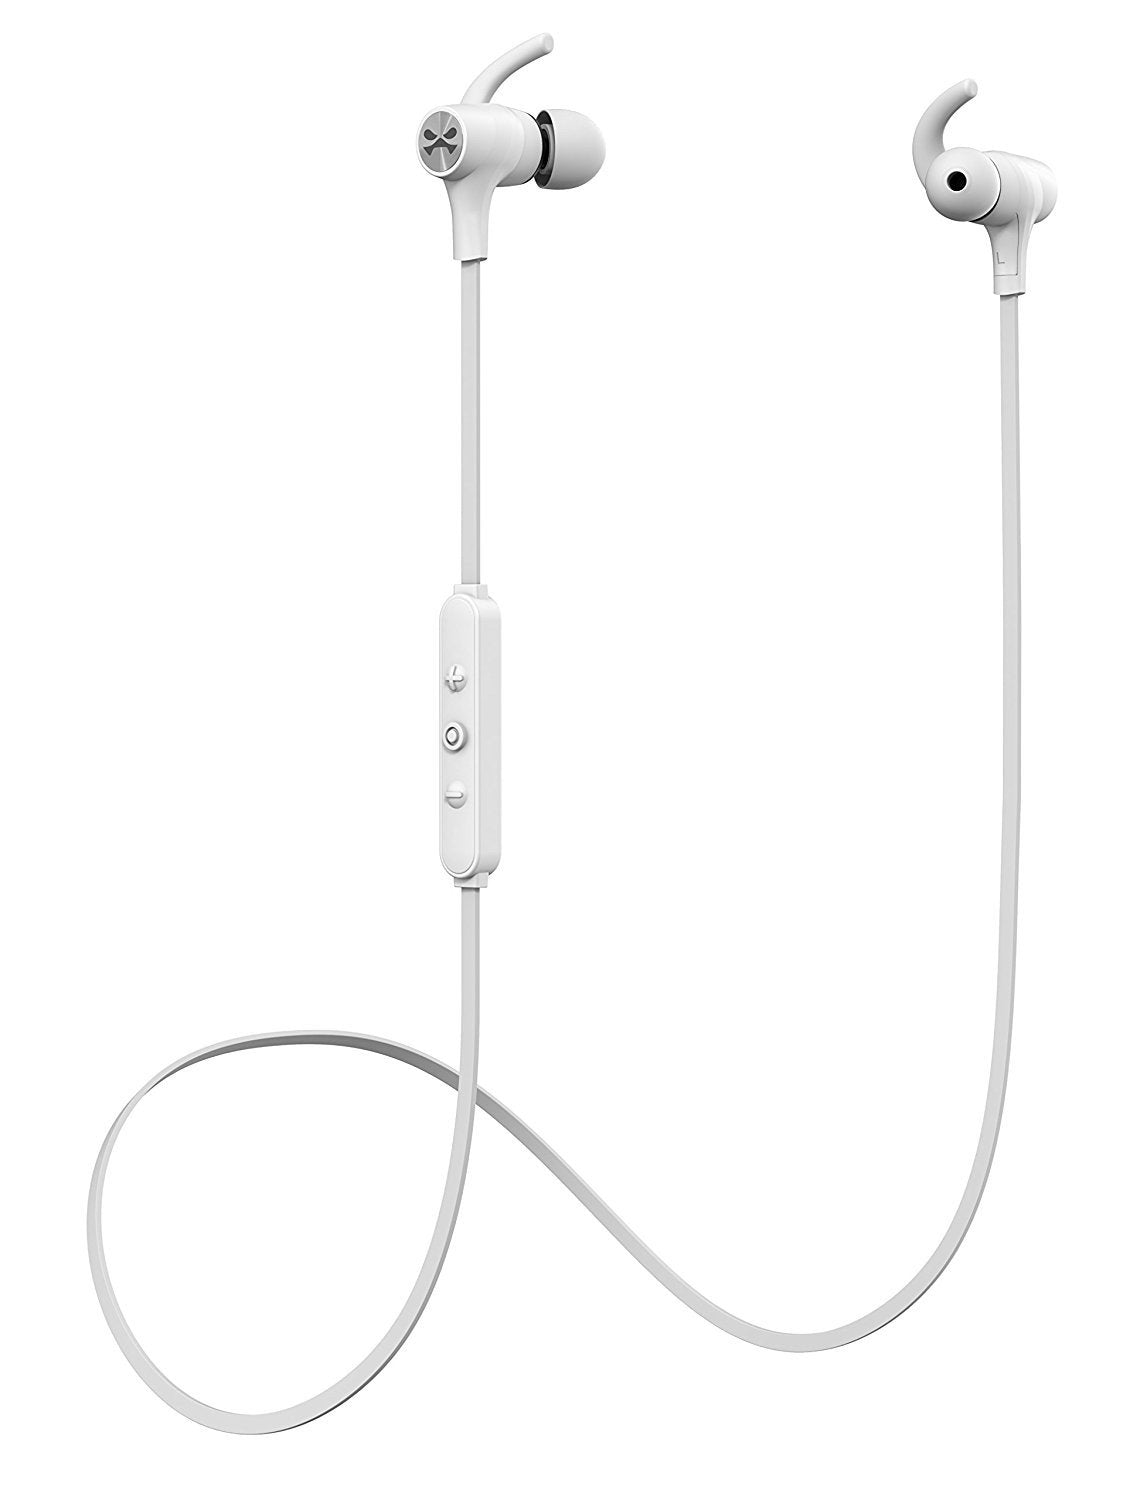 Wireless Bluetooth Earbuds Stereo Headphones, Ghostek Silencer Series Earphones With Mic + Controls - White